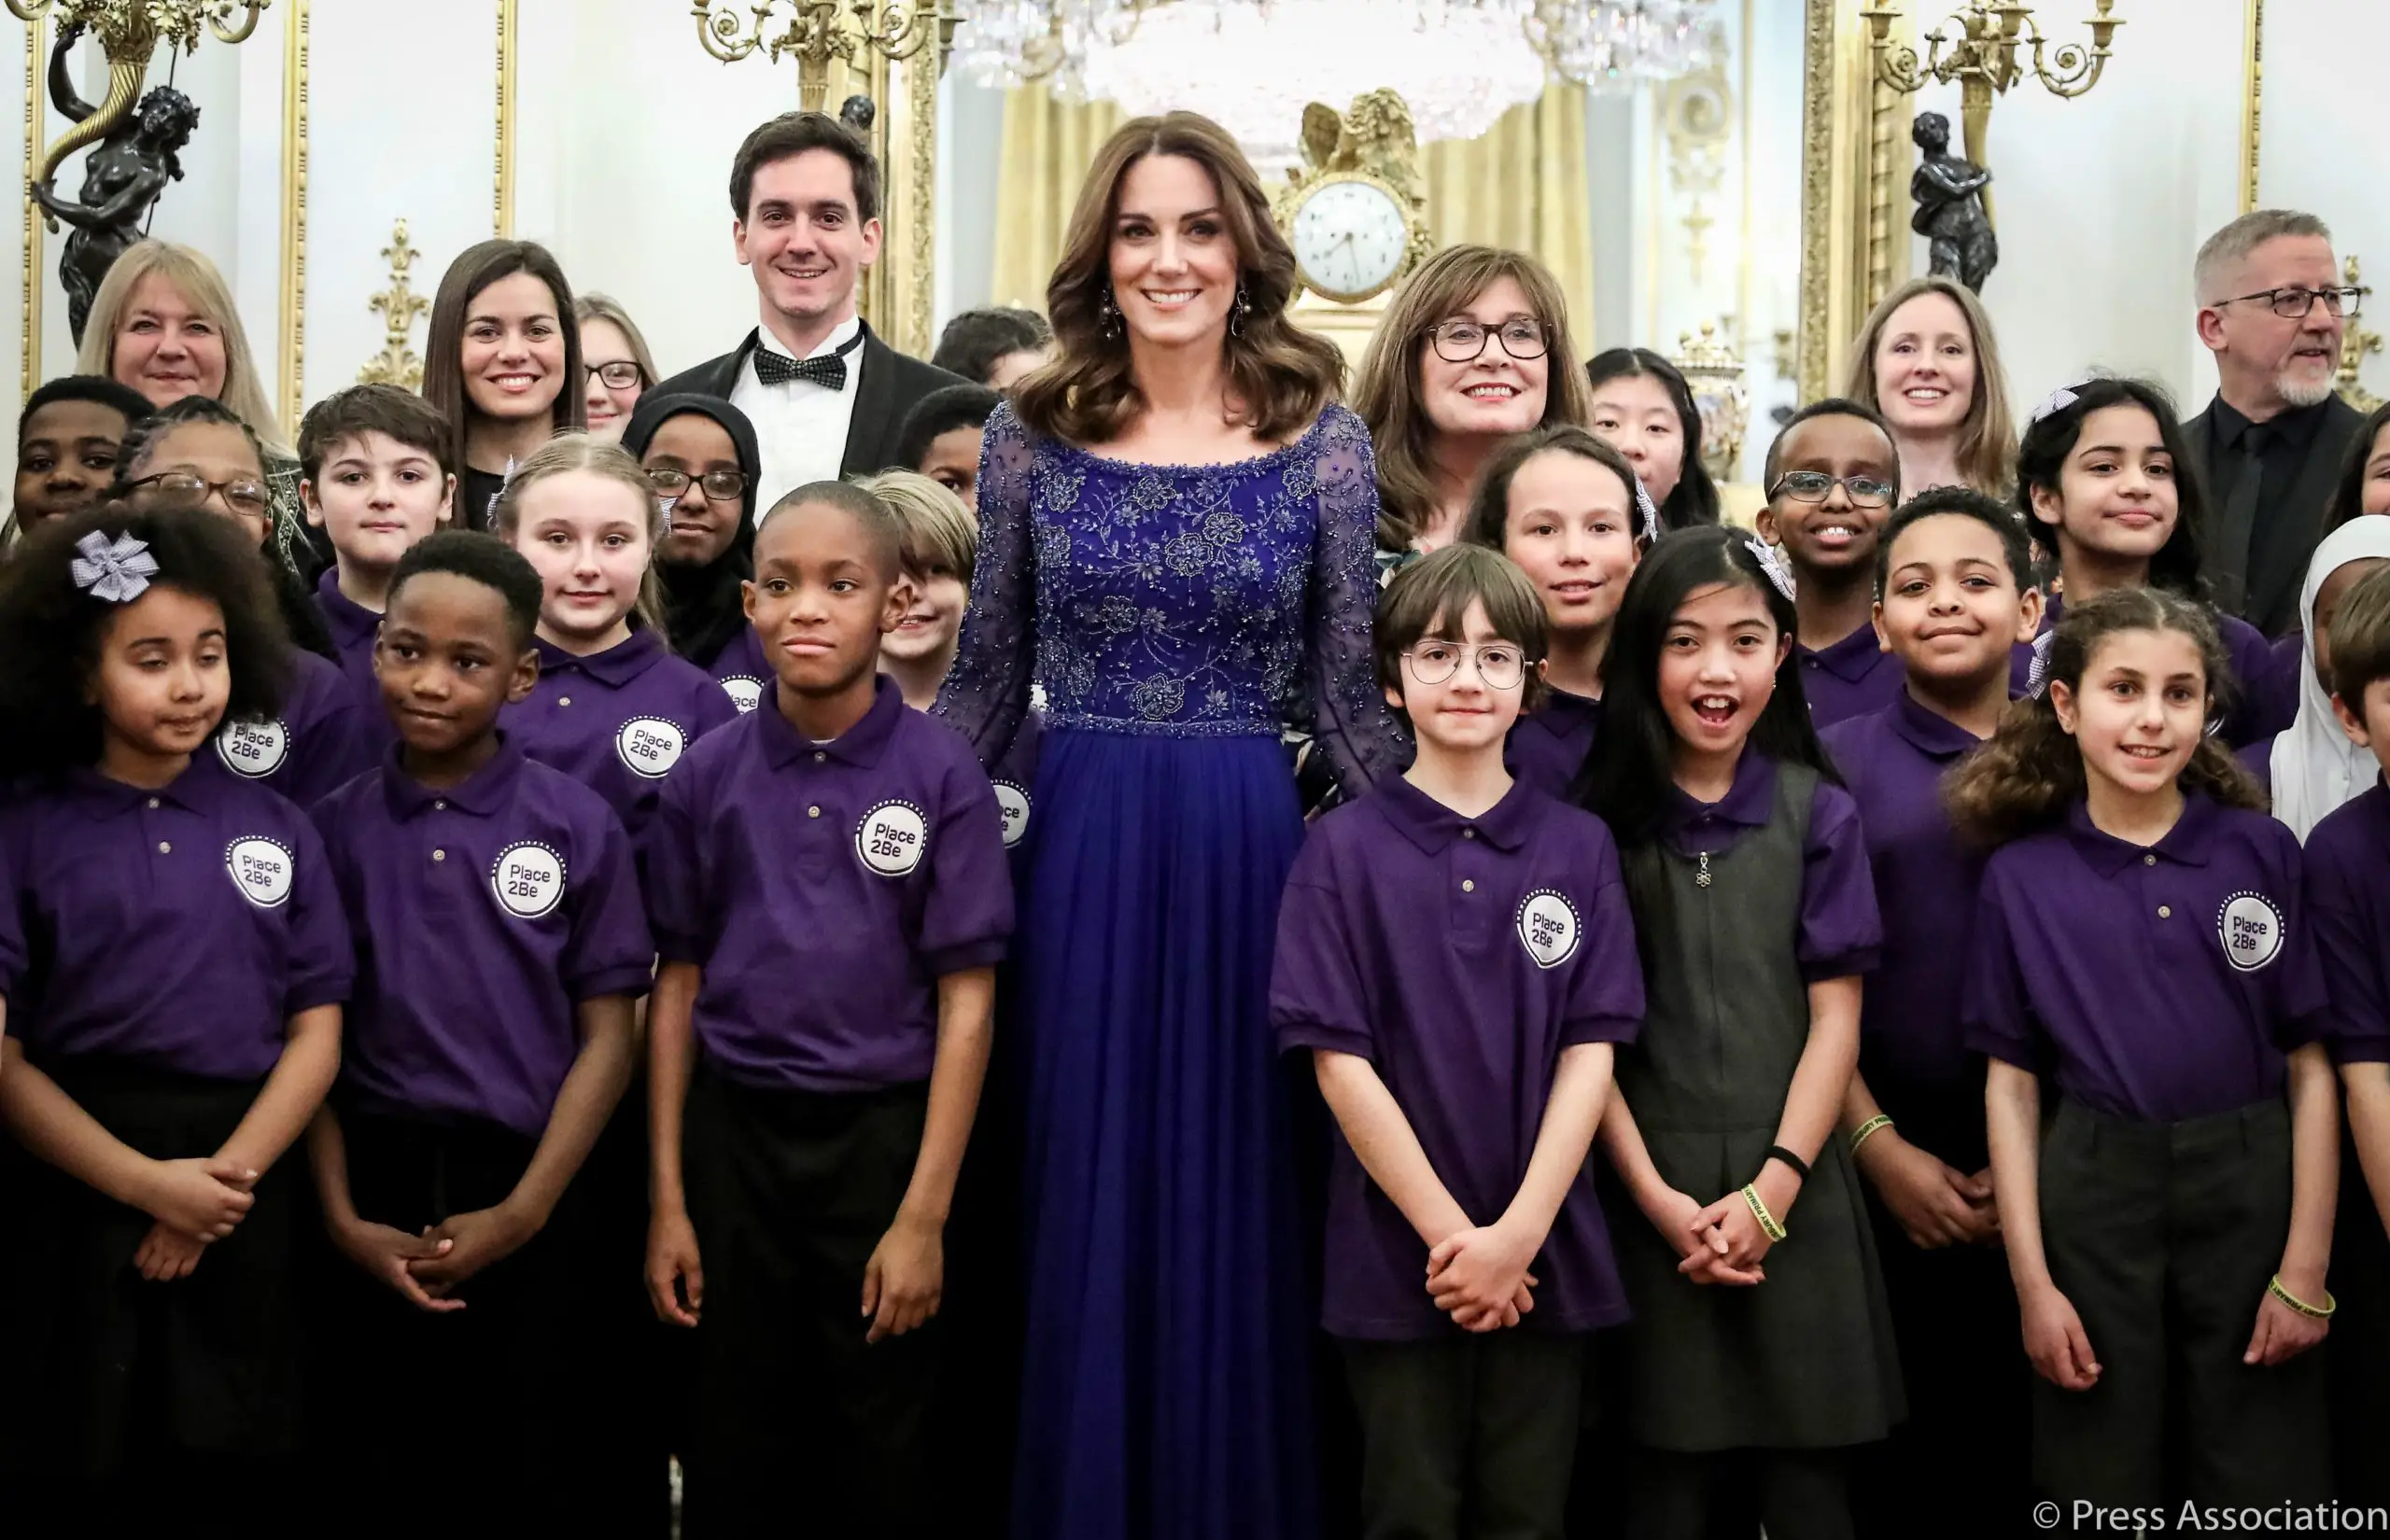 Duchess of Cambridge hosted a Gala Dinner for Place2Be at Buckingham Palace